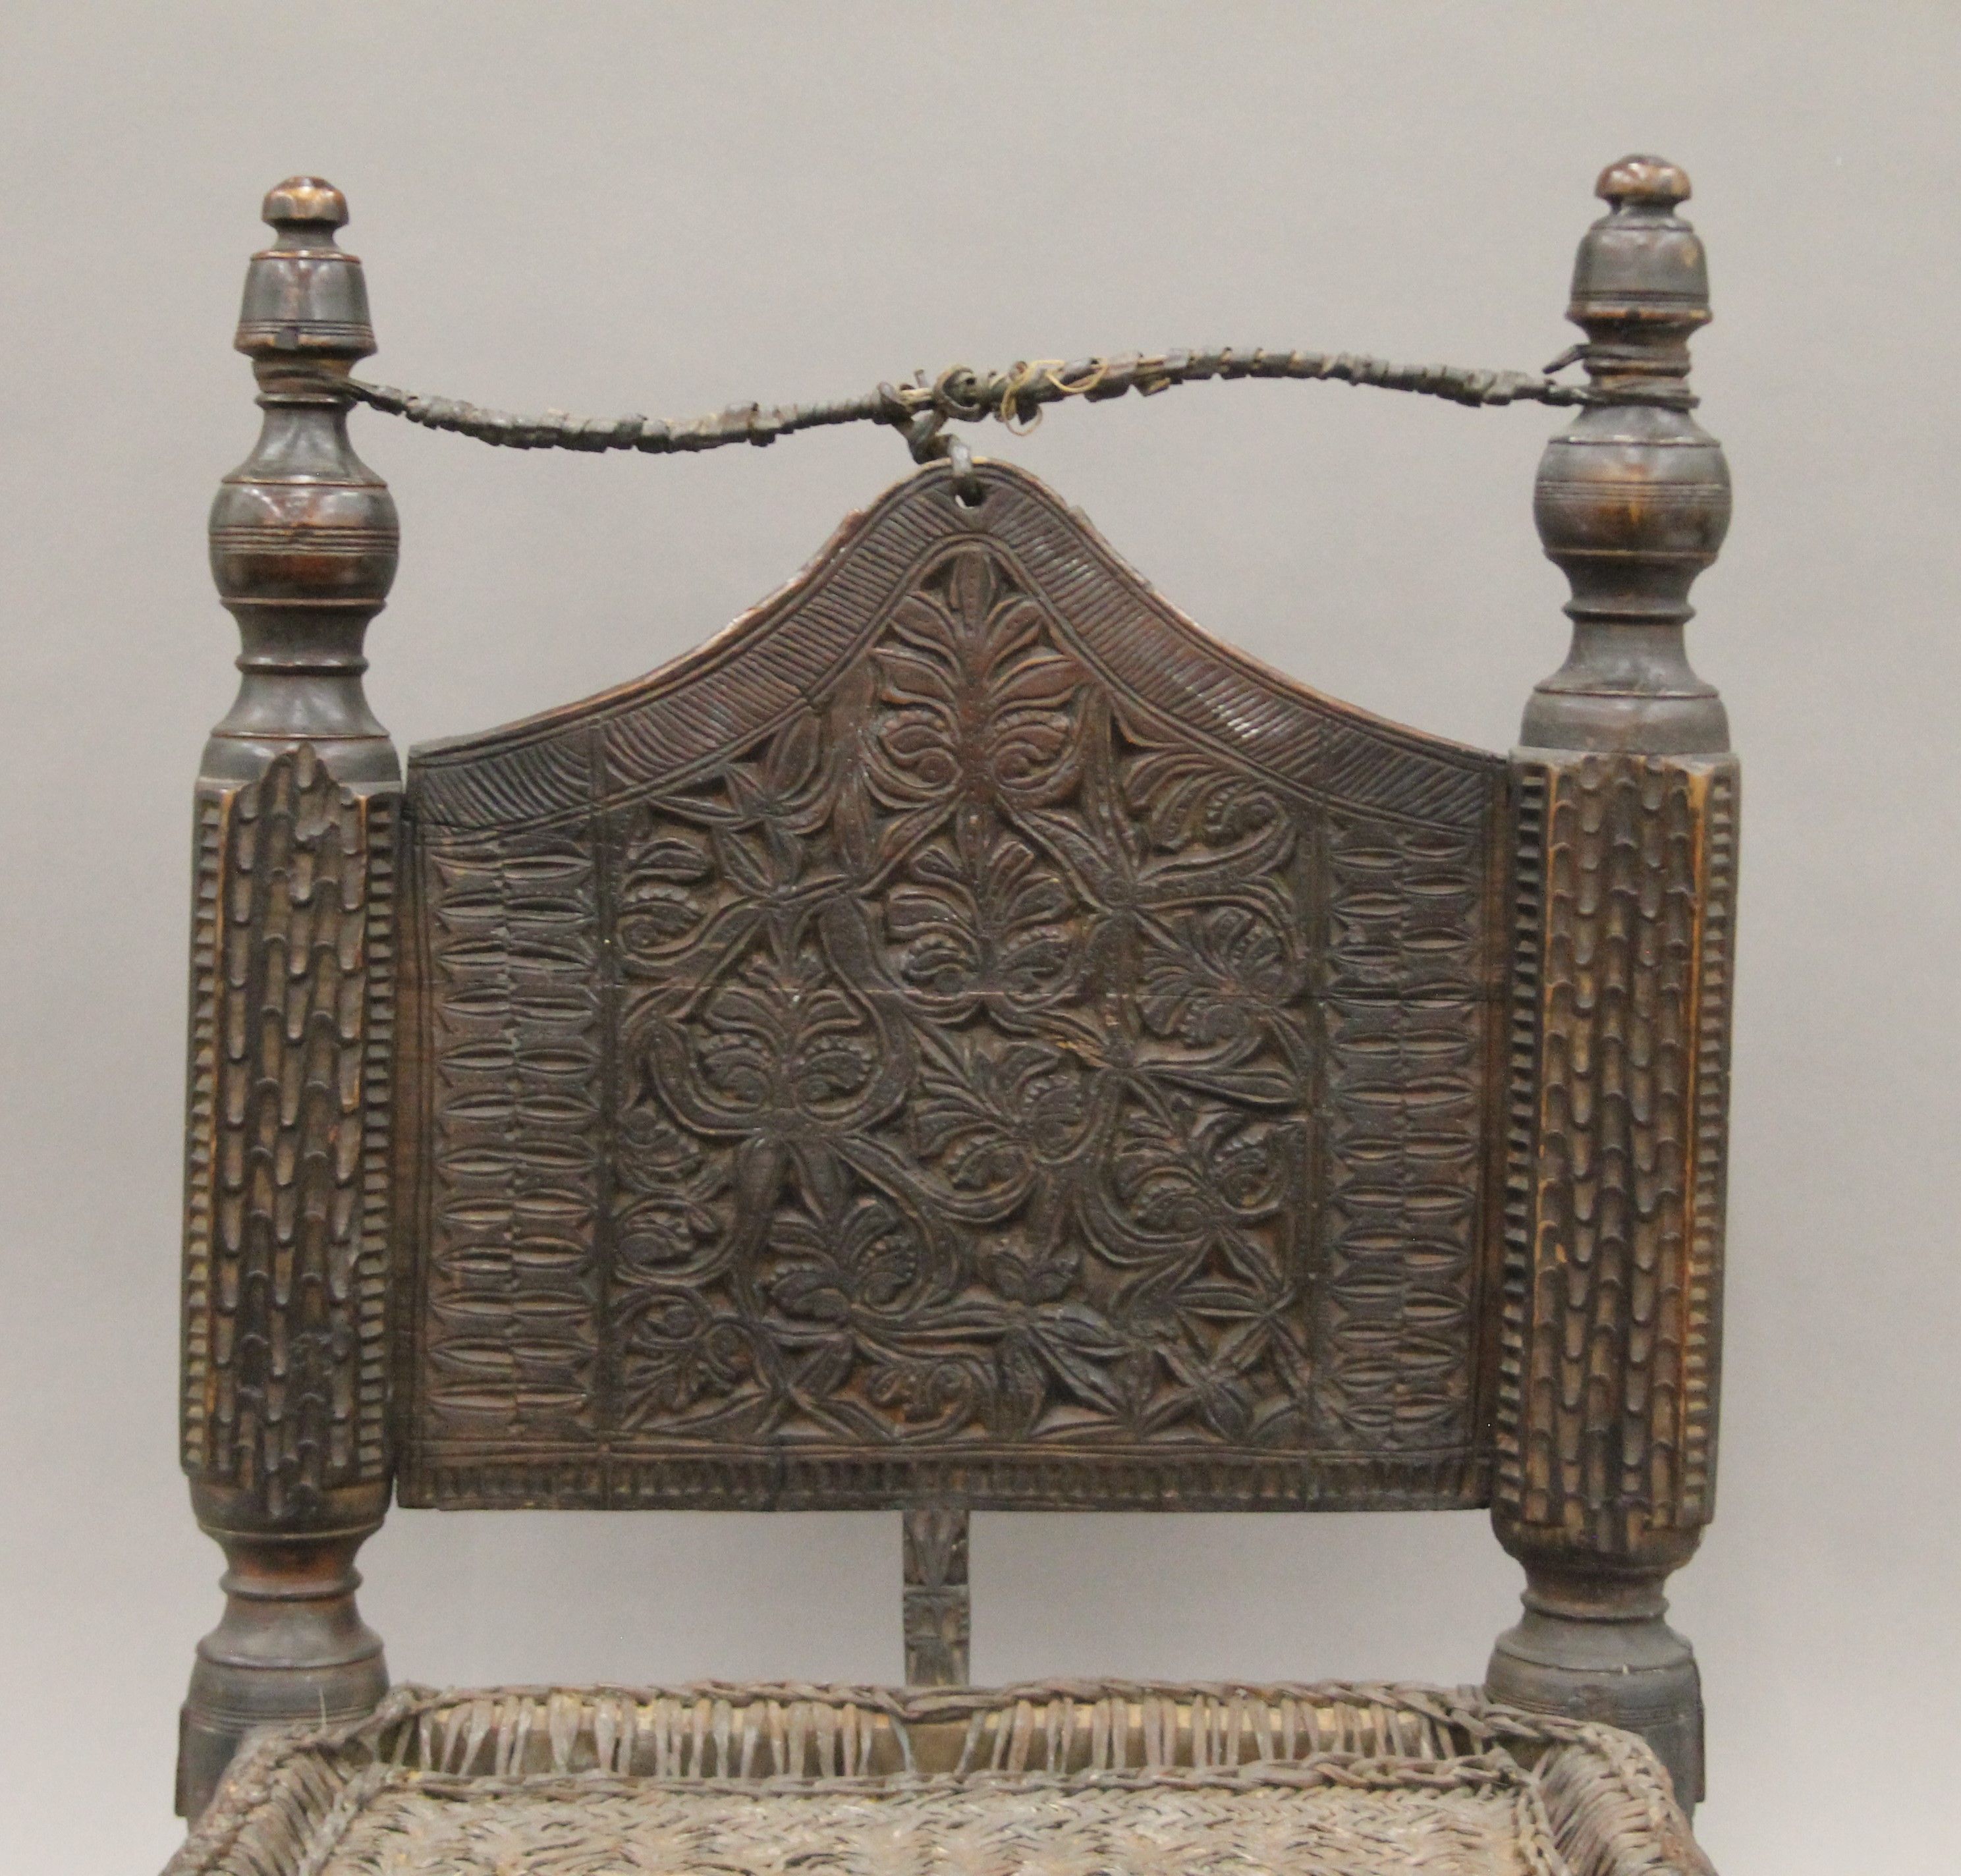 An Indian antique low hardwood chair with reeded seating. 64 cm high. - Image 5 of 5